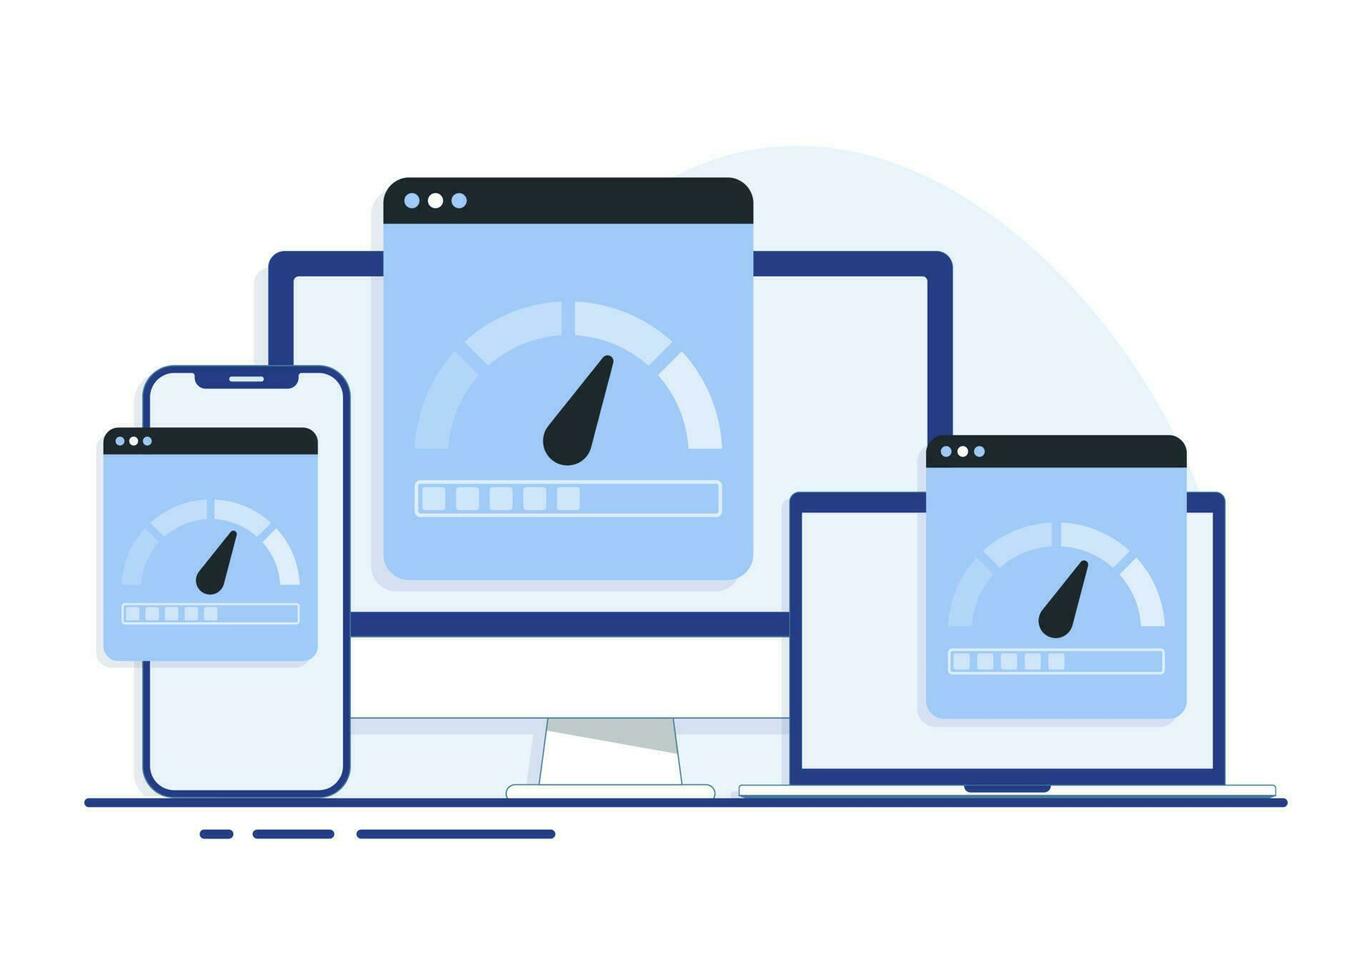 Smartphone, laptop and computer with internet connection speed test on the screen, Internet download speed, and network performance on web page flat illustration vector